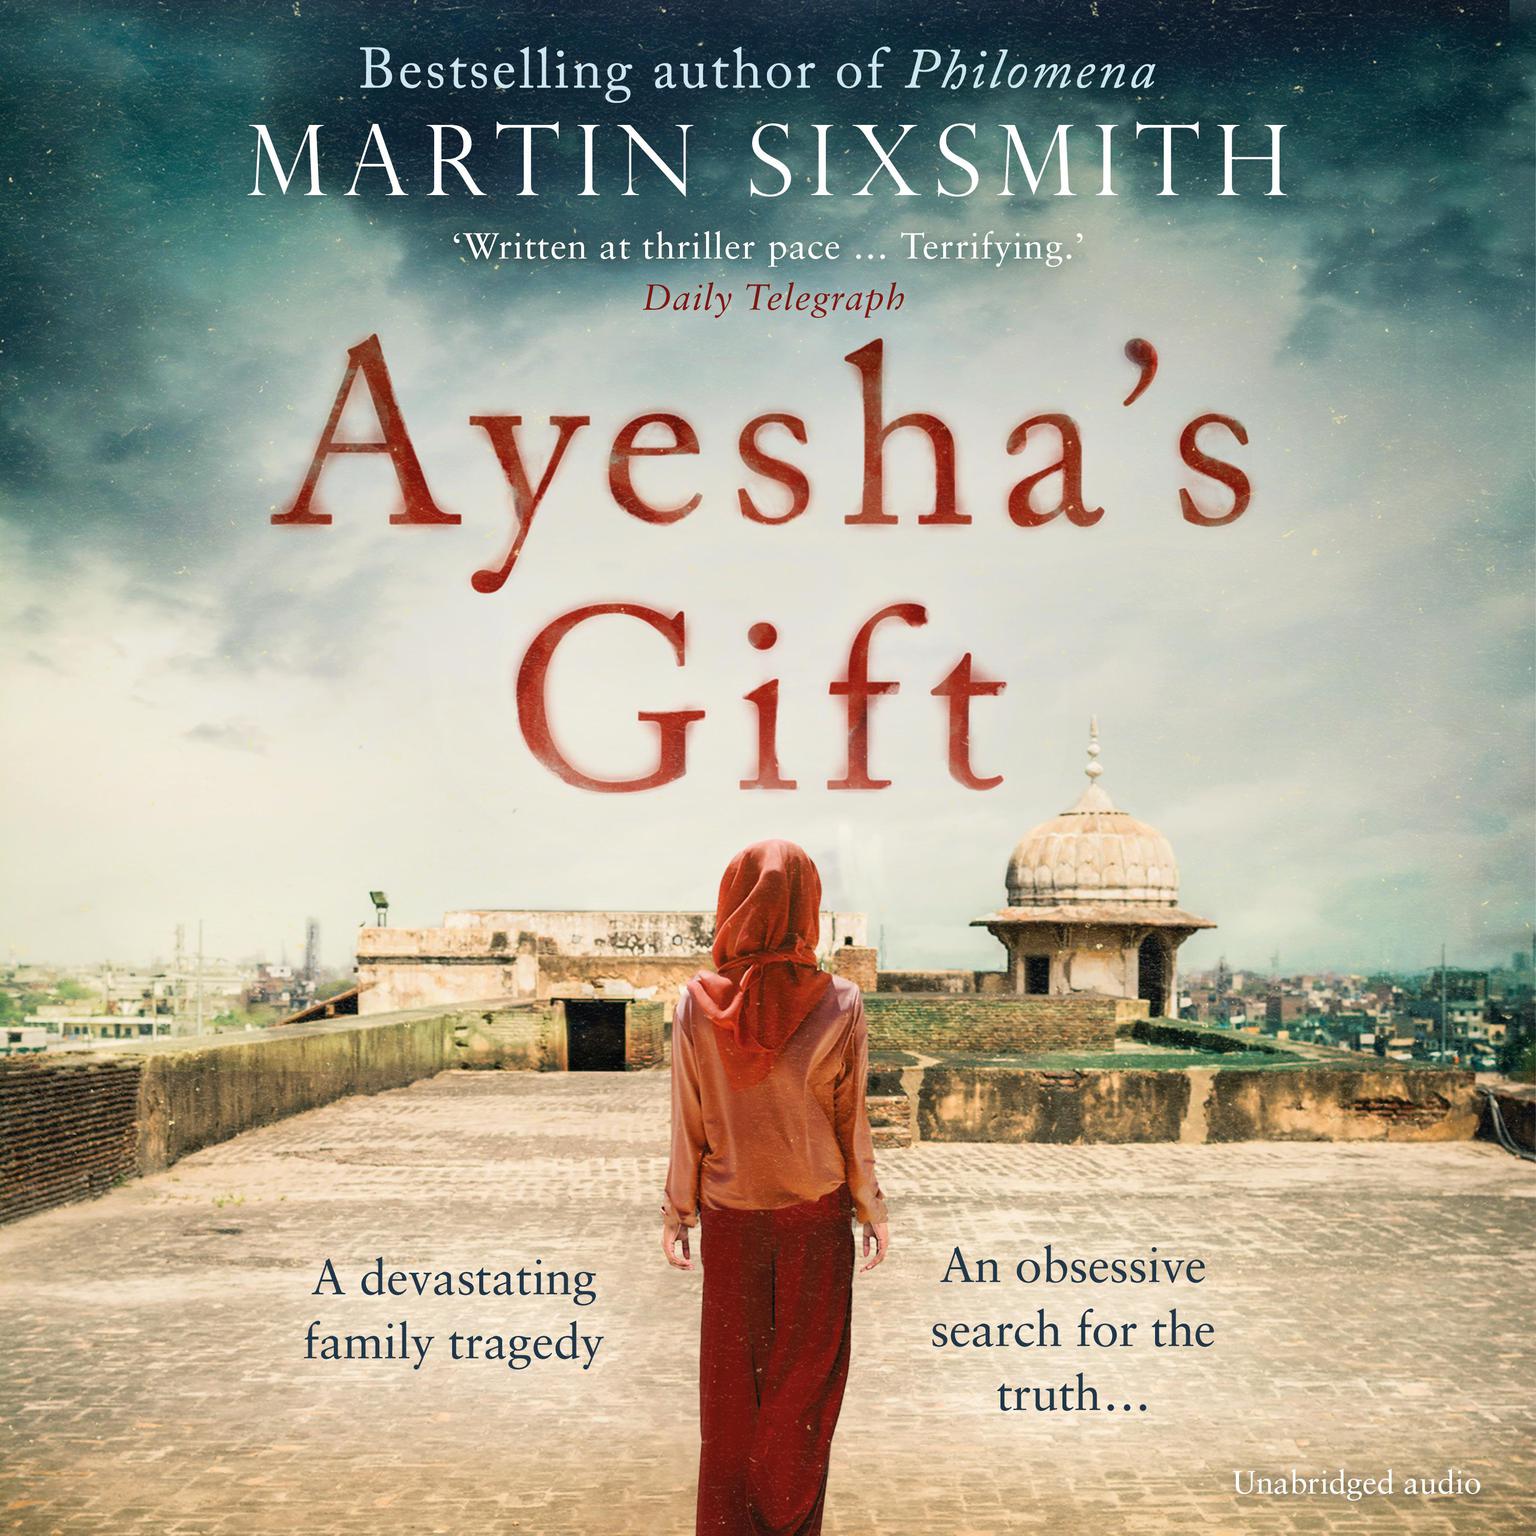 Ayeshas Gift: A daughters search for the truth about her father Audiobook, by Martin Sixsmith